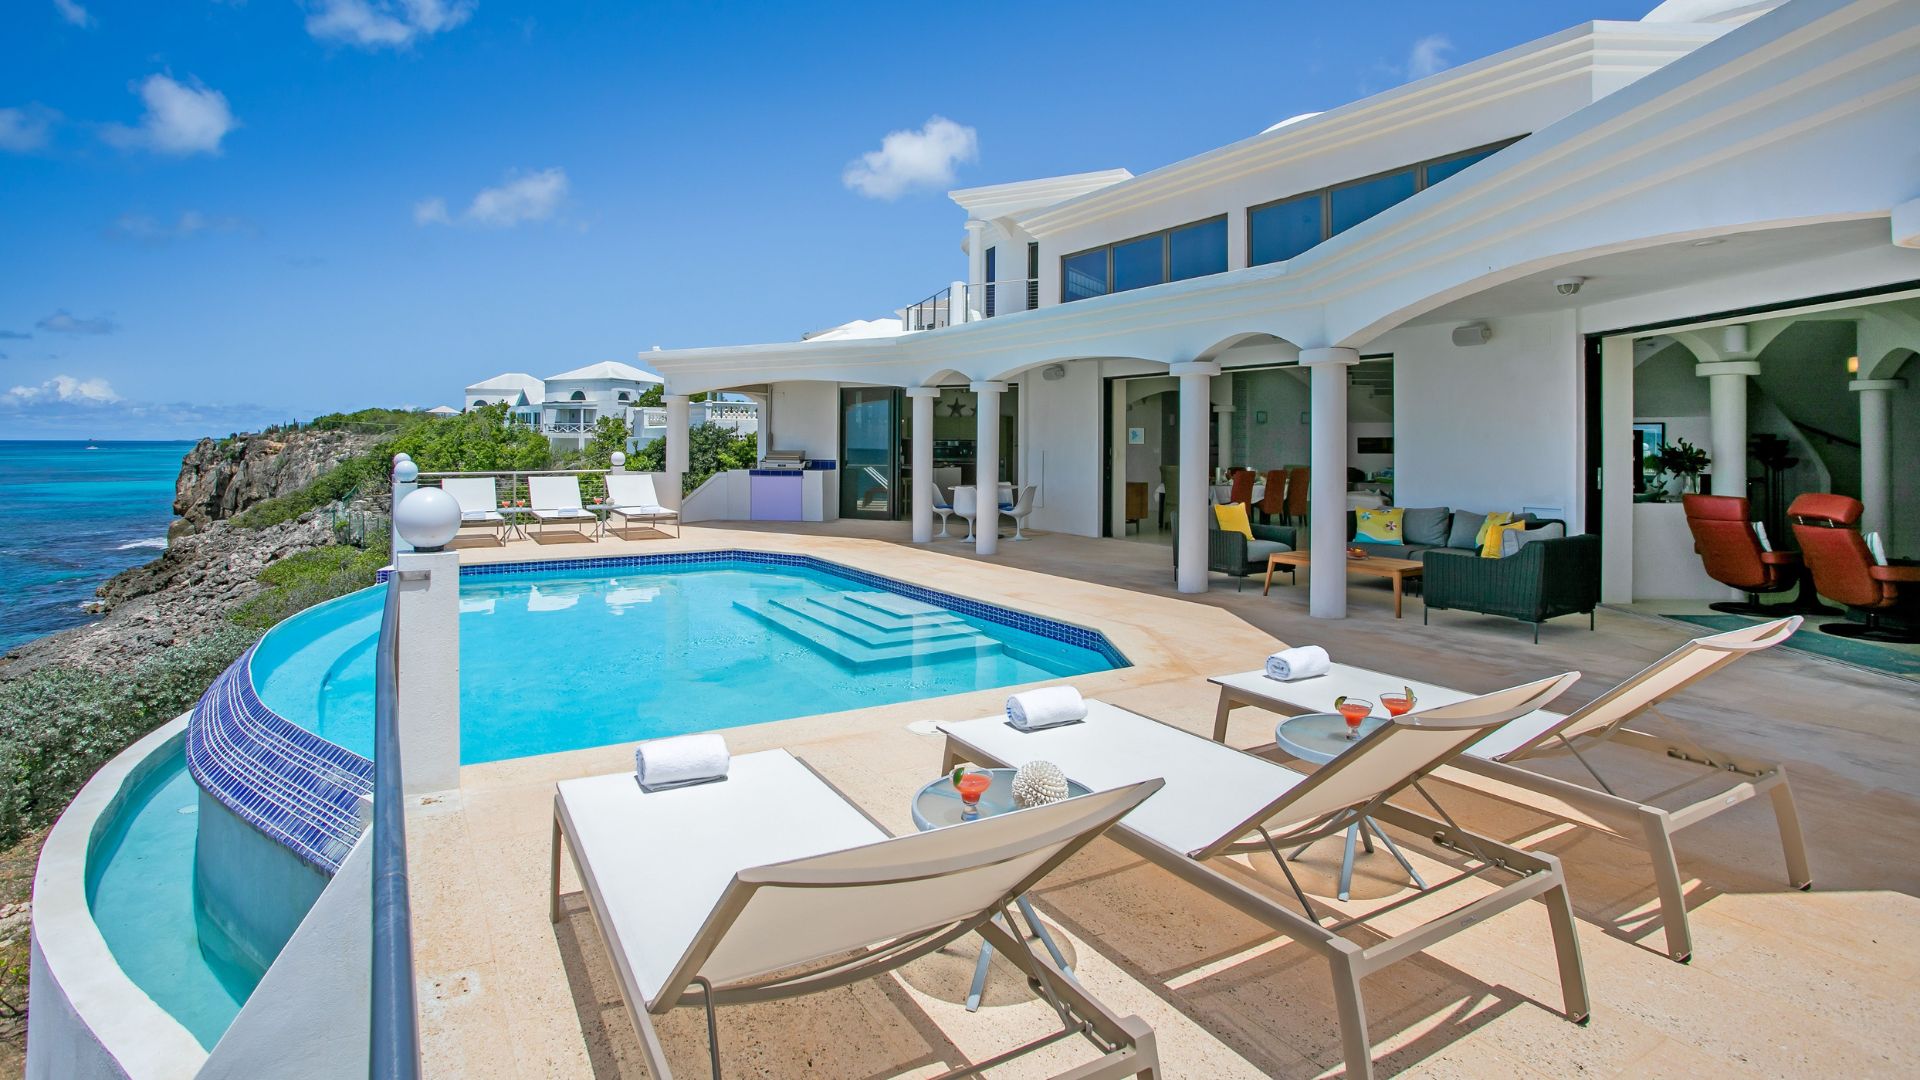 View our luxury vacation rentals in Anguilla